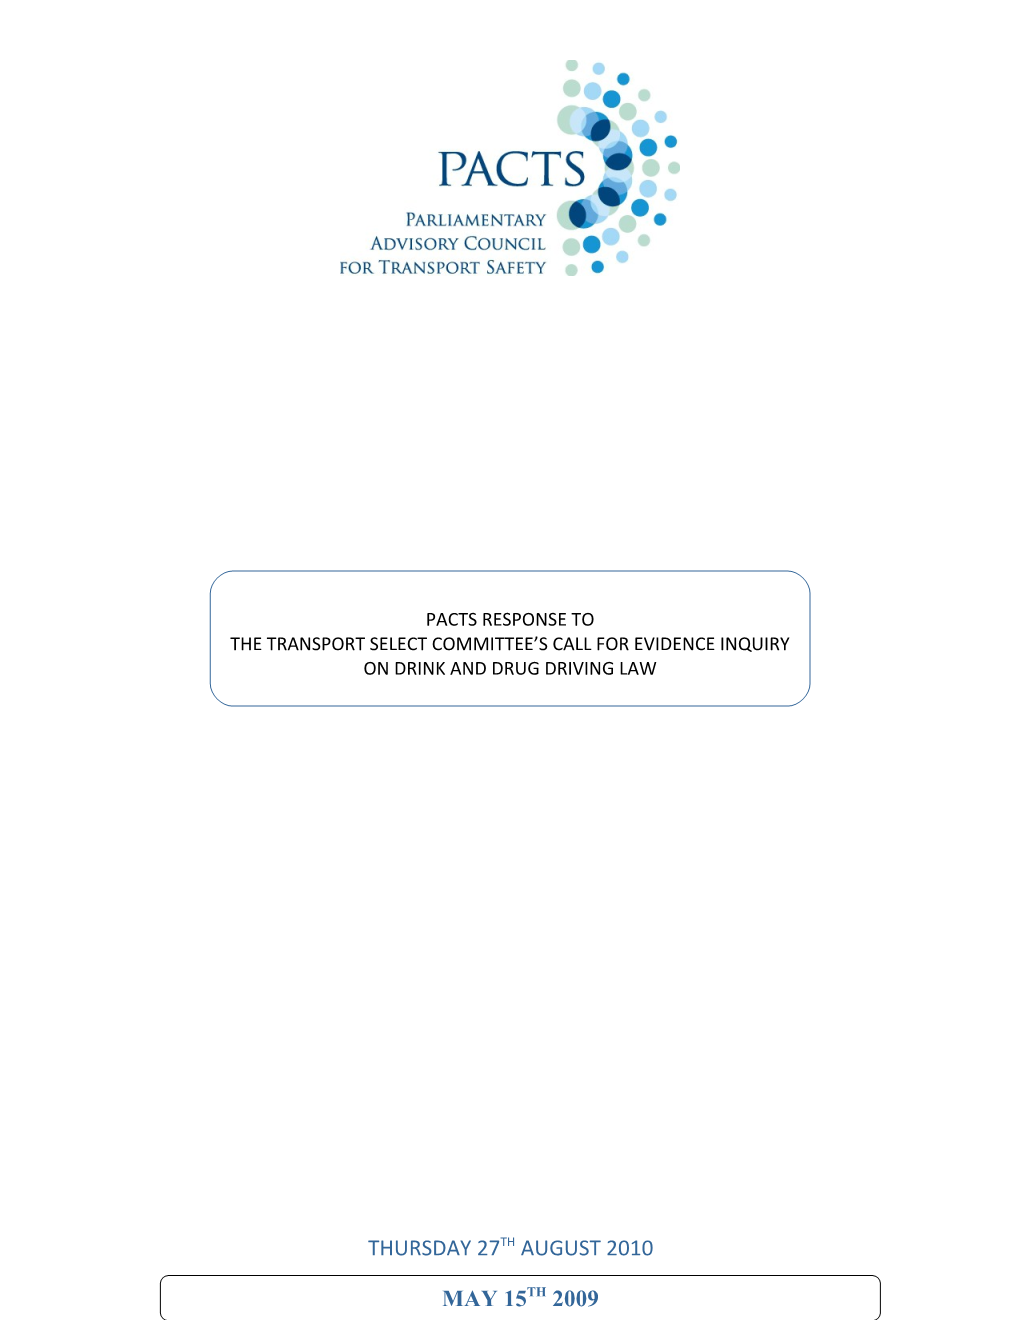 The Parliamentary Advisory Council for Transport Safety (Pacts)